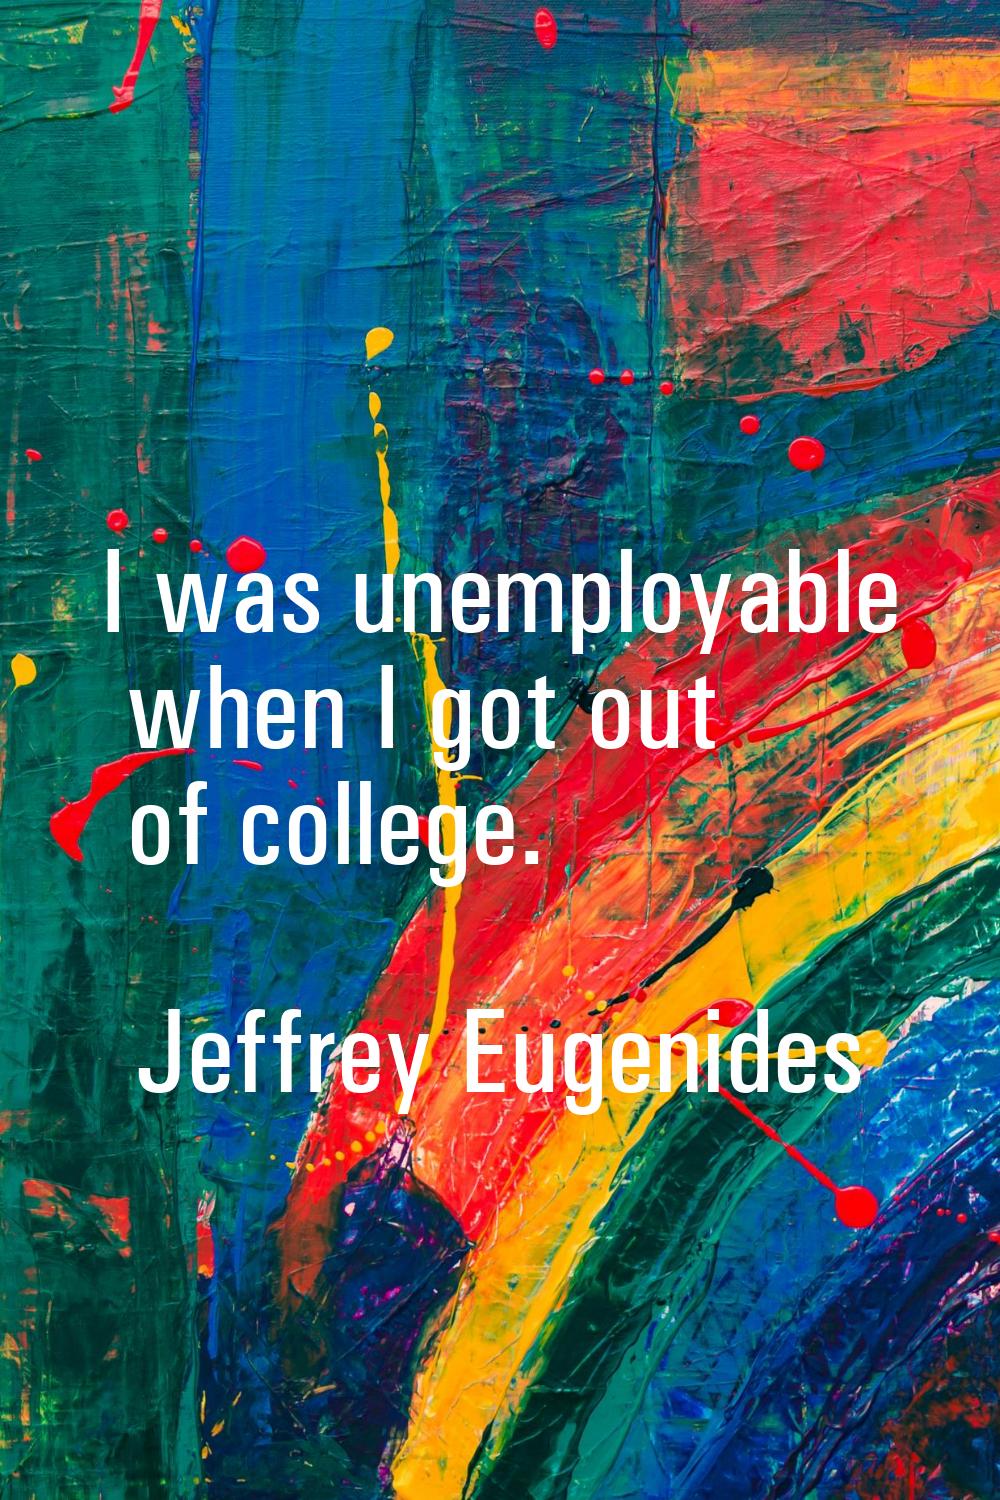 I was unemployable when I got out of college.